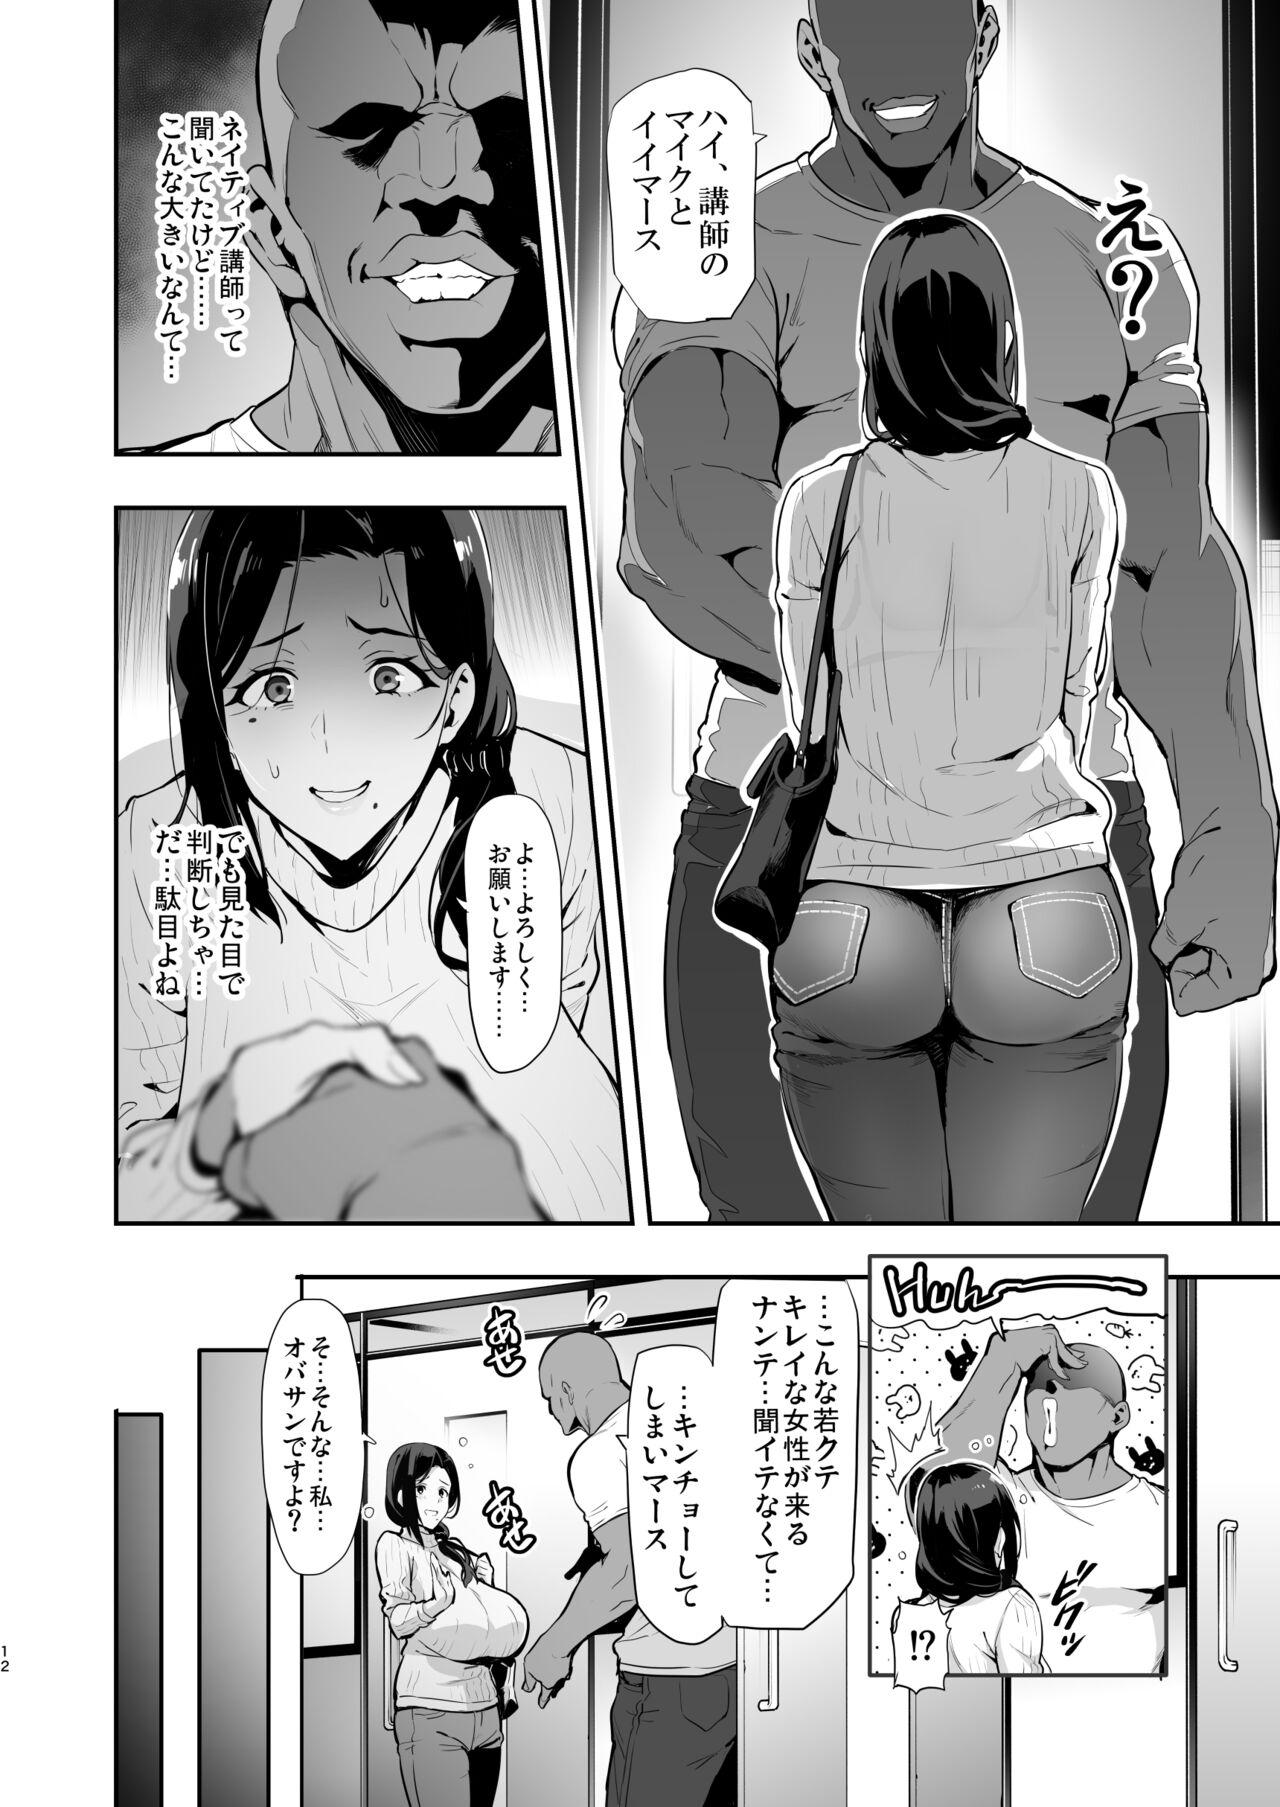 Best Blowjobs Ever Weeping Les Cherry Blossoms Dark Hana Meku Passage 2209 Interacial - Page 10